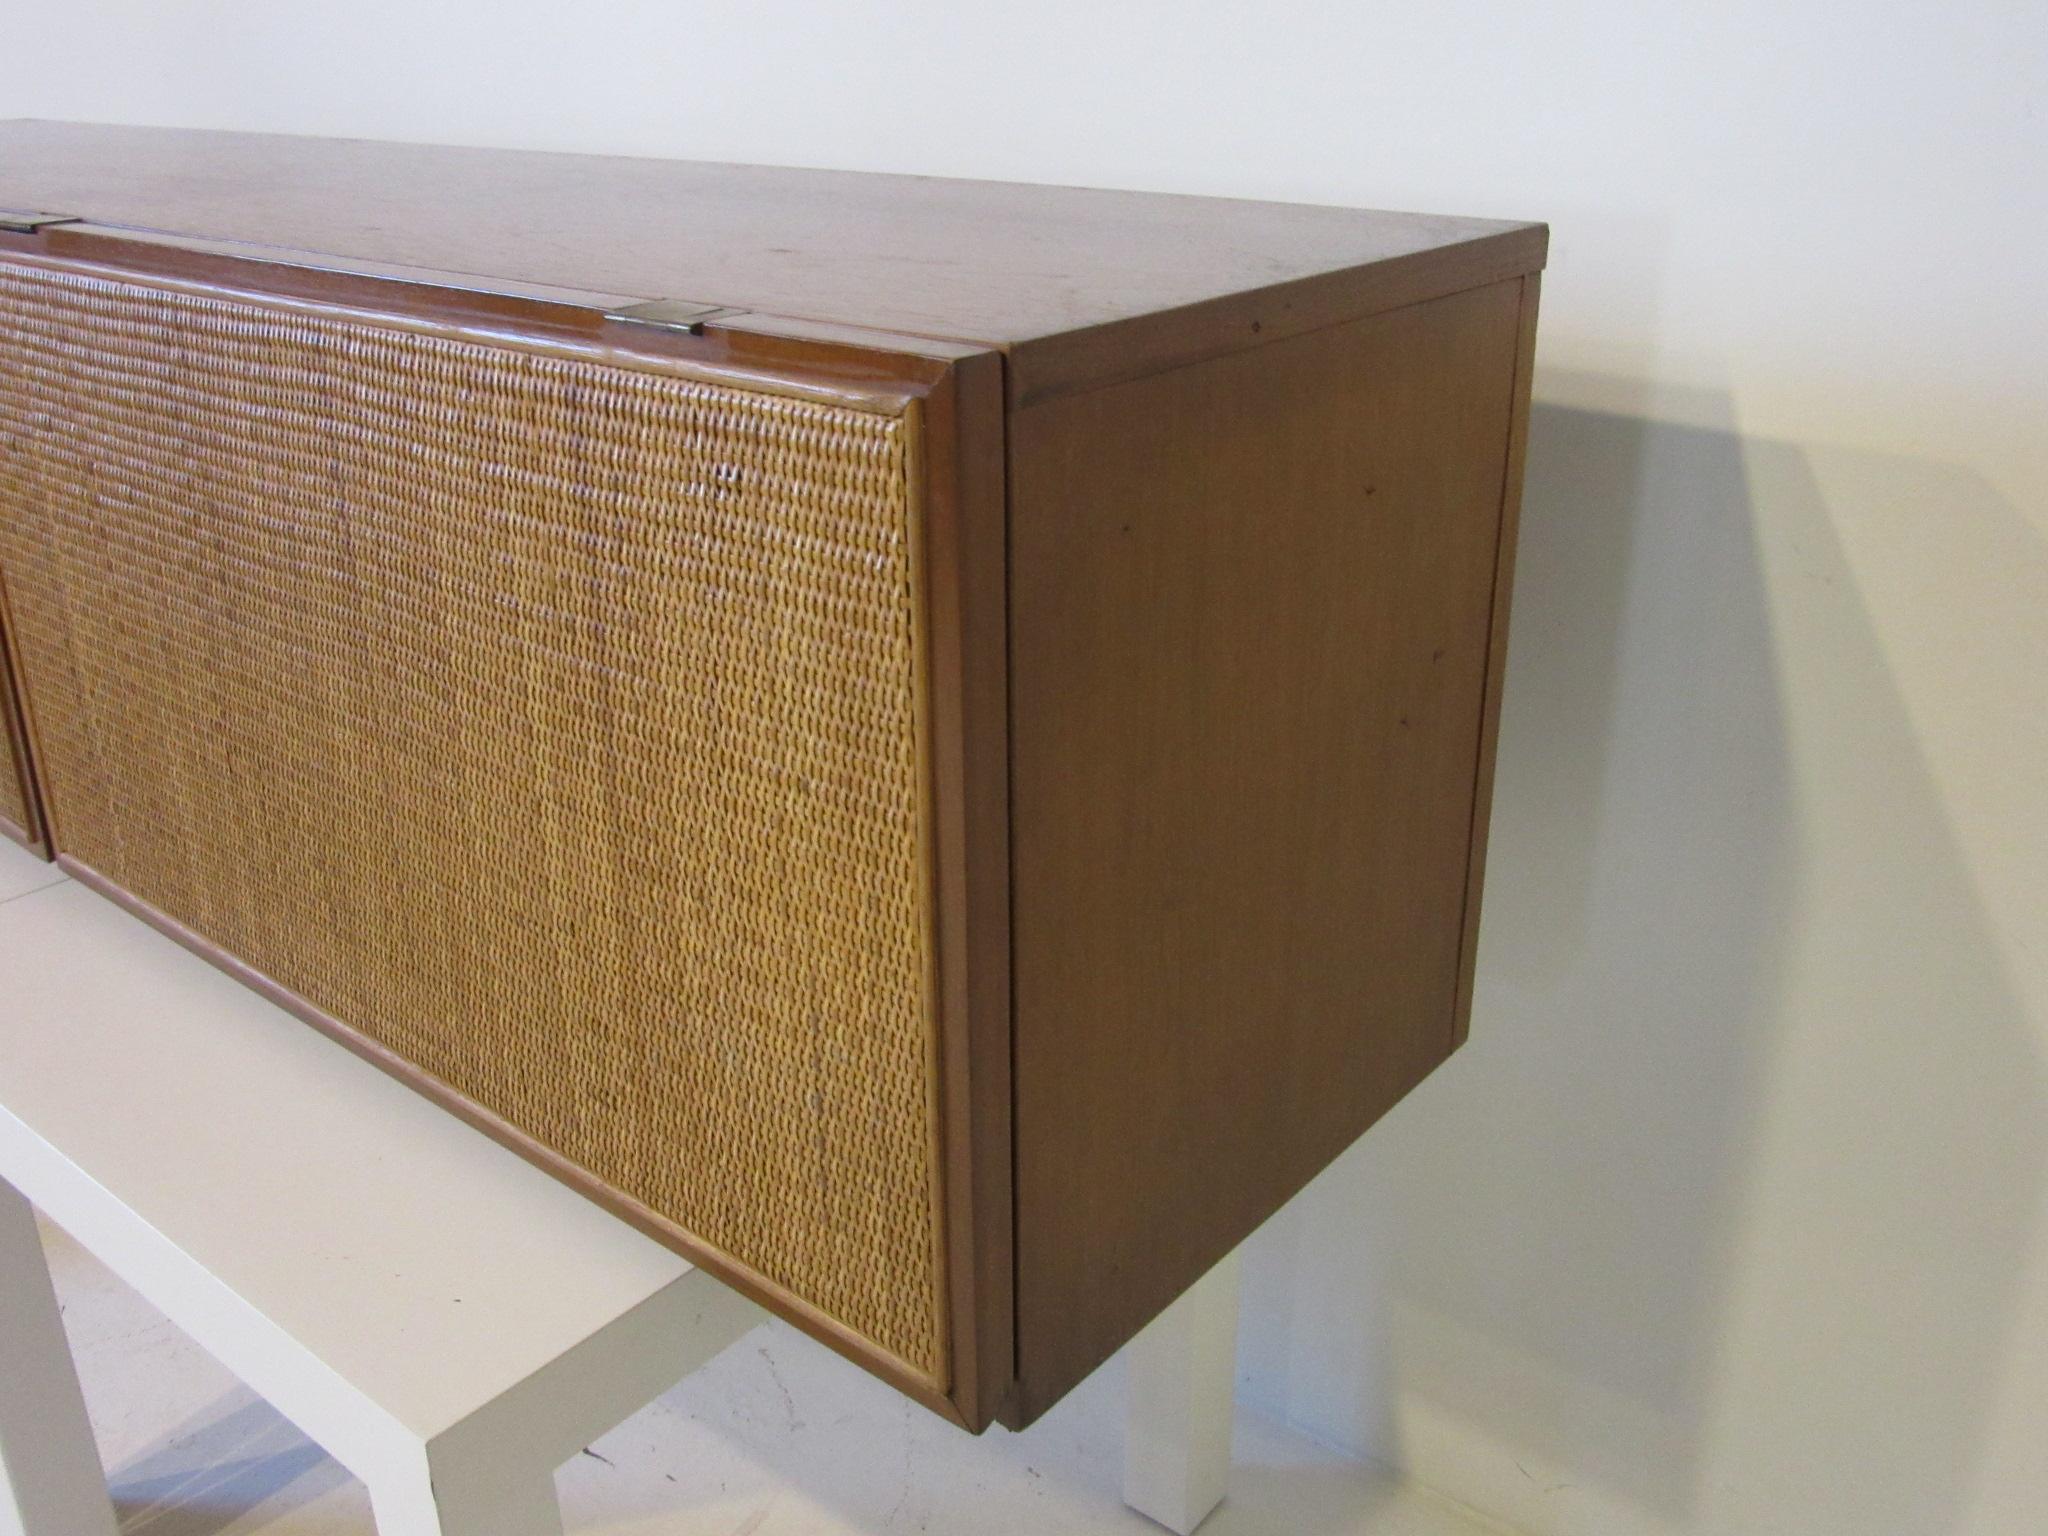 A custom ordered walnut hanging cabinet with two woven cane doors on brass hinges that flip up and rest on the top of the piece revealing double storage banks. From a National Historic Landmark Building built in 1954 in Columbus Indiana the mid